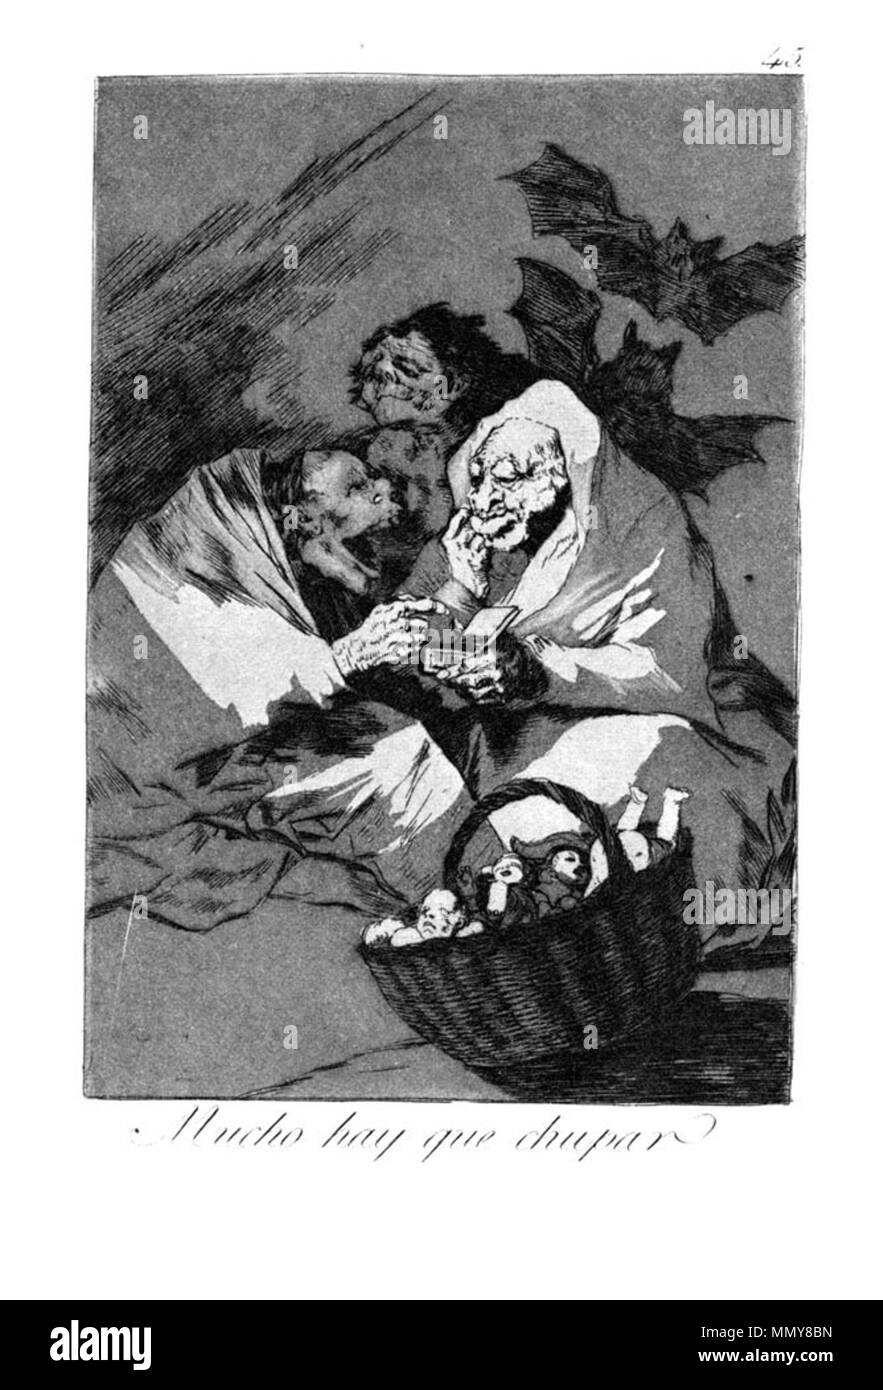 . Los Caprichos is a set of 80 aquatint prints created by Francisco Goya for release in 1799.  . 1799.   Francisco Goya  (1746–1828)      Alternative names Francisco Goya Lucientes, Francisco de Goya y Lucientes, Francisco José Goya Lucientes  Description Spanish painter, printmaker, lithographer, engraver and etcher  Date of birth/death 30 March 1746 16 April 1828  Location of birth/death Fuendetodos Bordeaux  Work location Madrid, Zaragoza, Bordeaux  Authority control  : Q5432 VIAF:?54343141 ISNI:?0000 0001 2280 1608 ULAN:?500118936 LCCN:?n79003363 NLA:?36545788 WorldCat Goya - Caprichos (45 Stock Photo